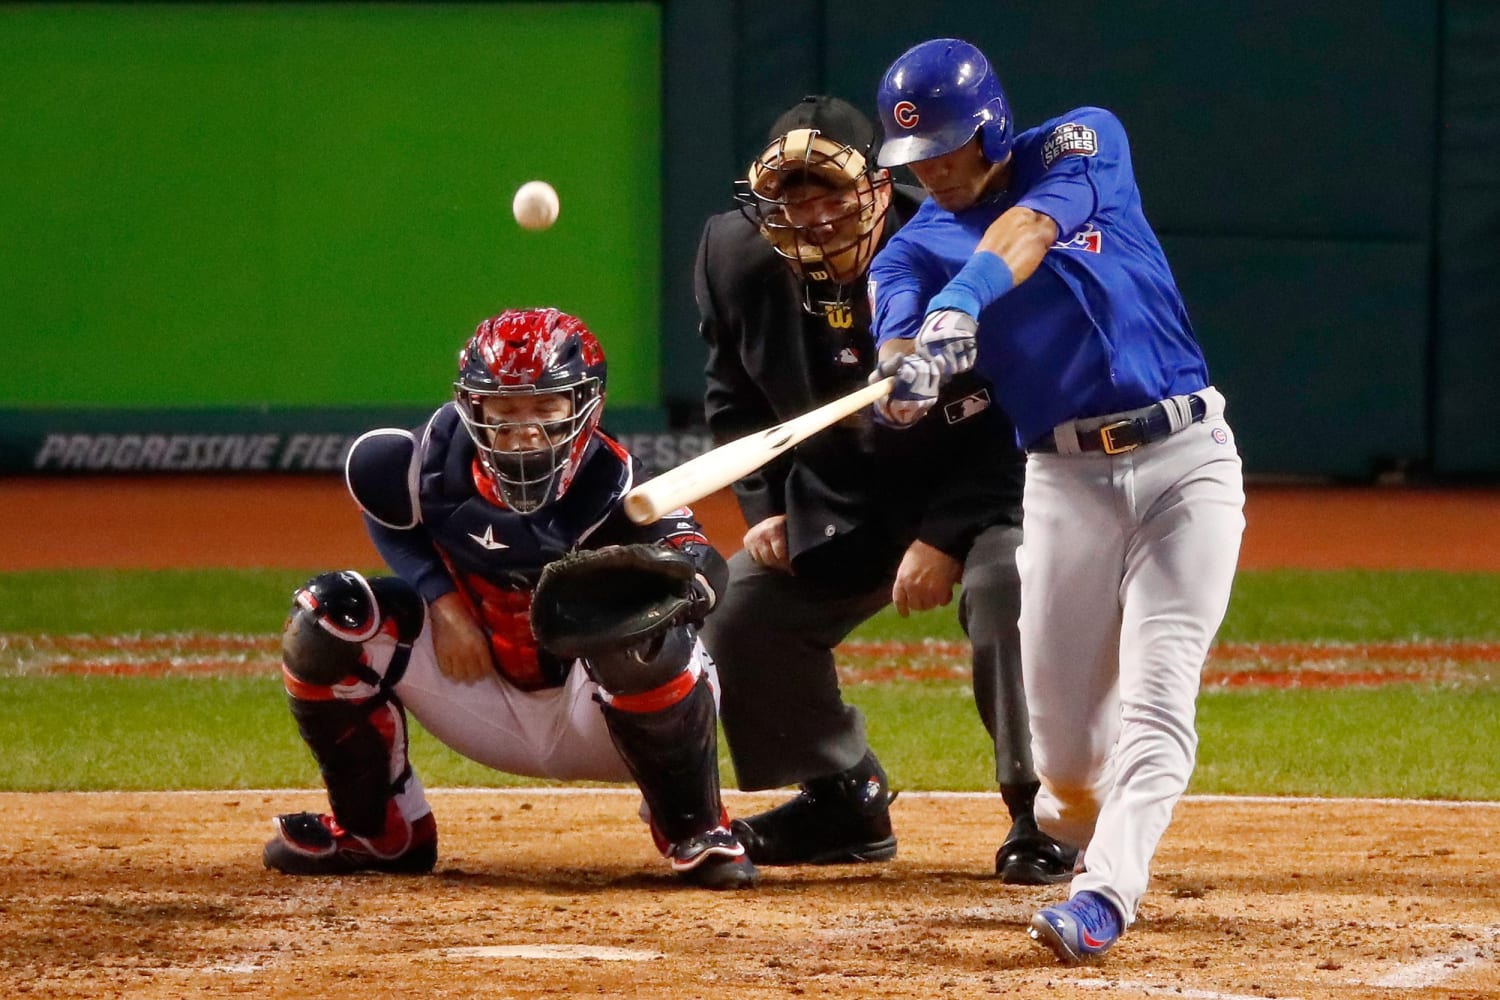 Cubs win to force Game 7 in World Series